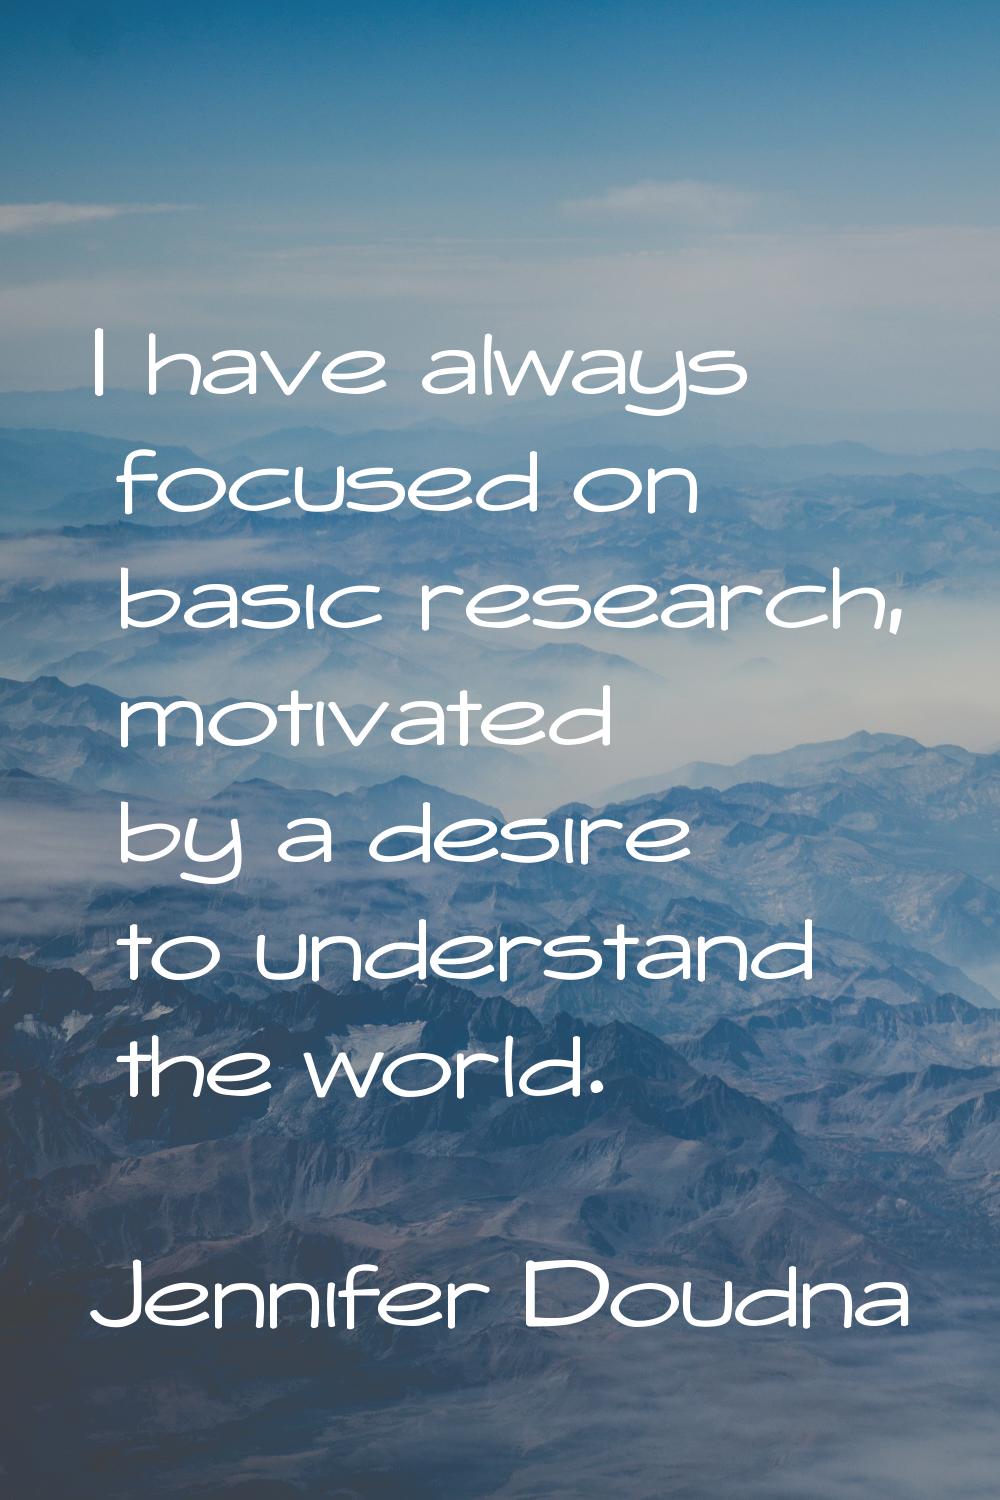 I have always focused on basic research, motivated by a desire to understand the world.